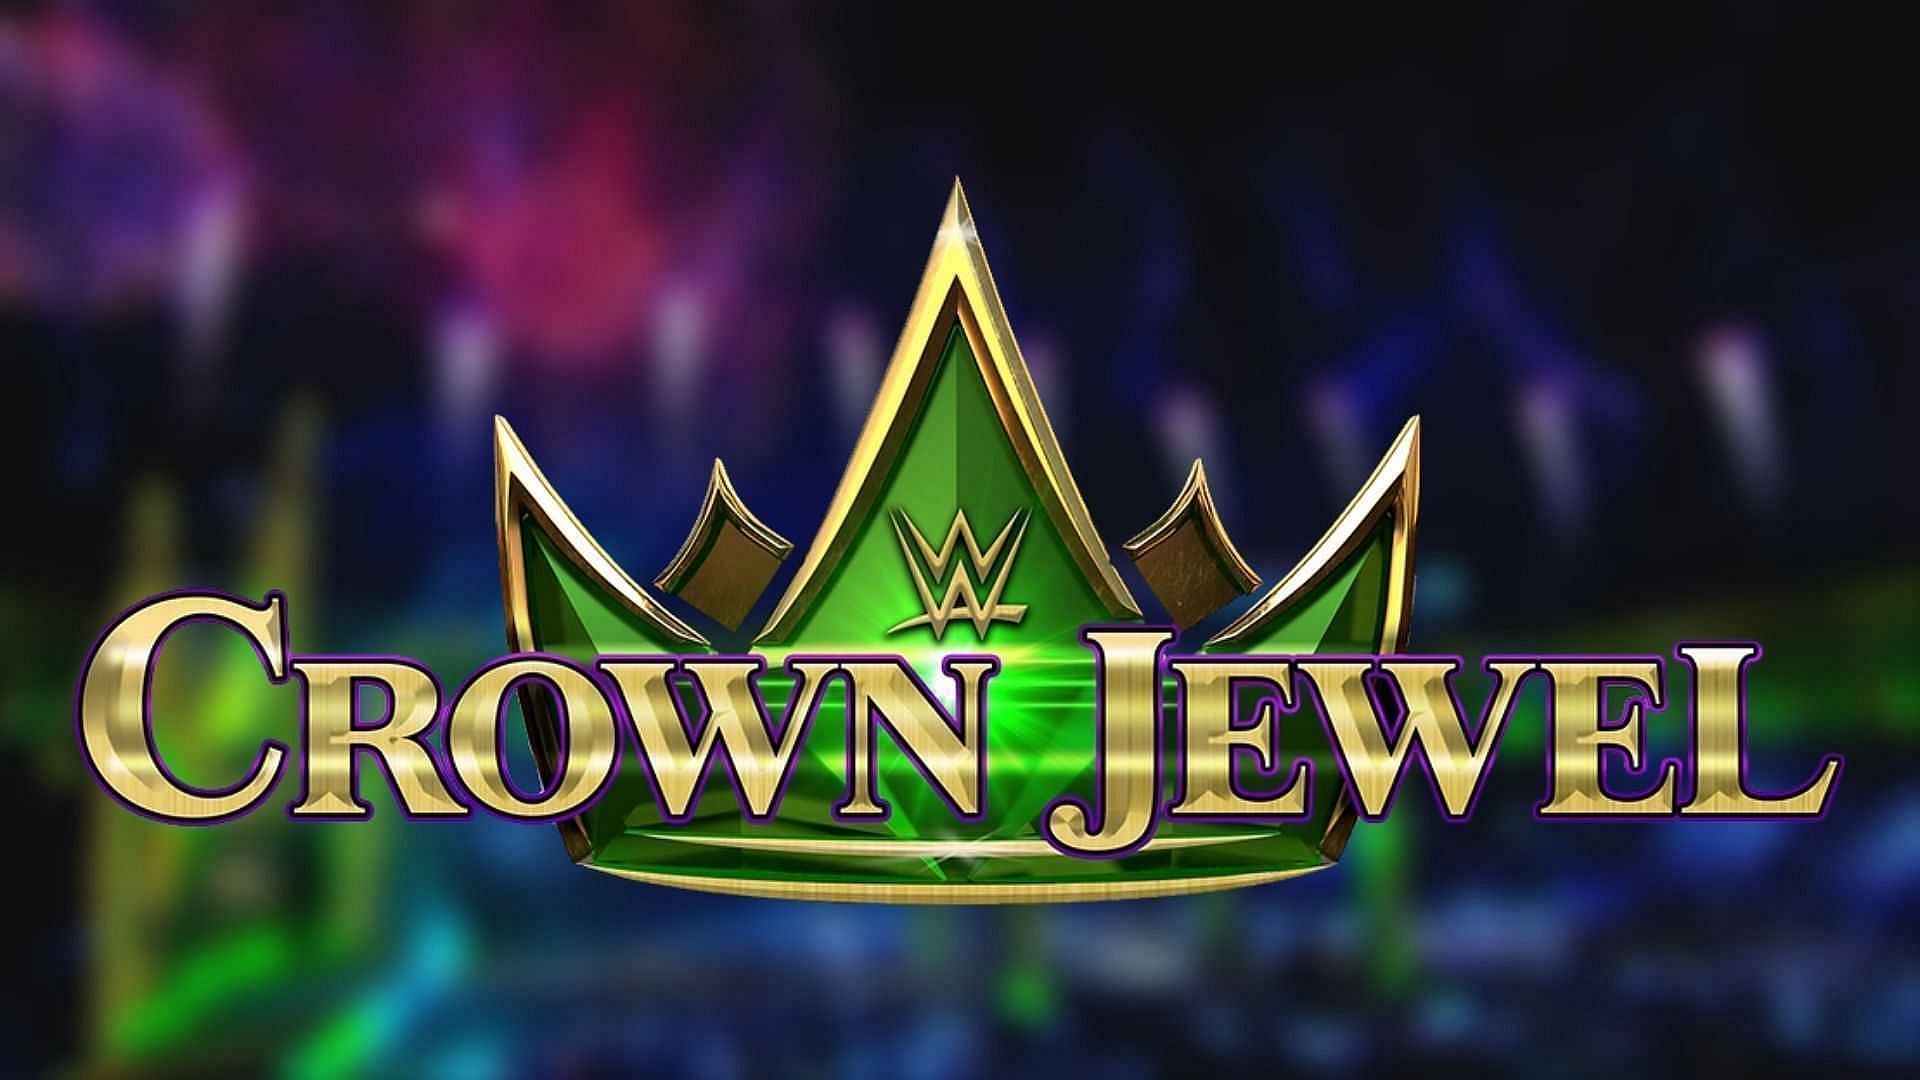 Another championship match planned for WWE Crown Jewel